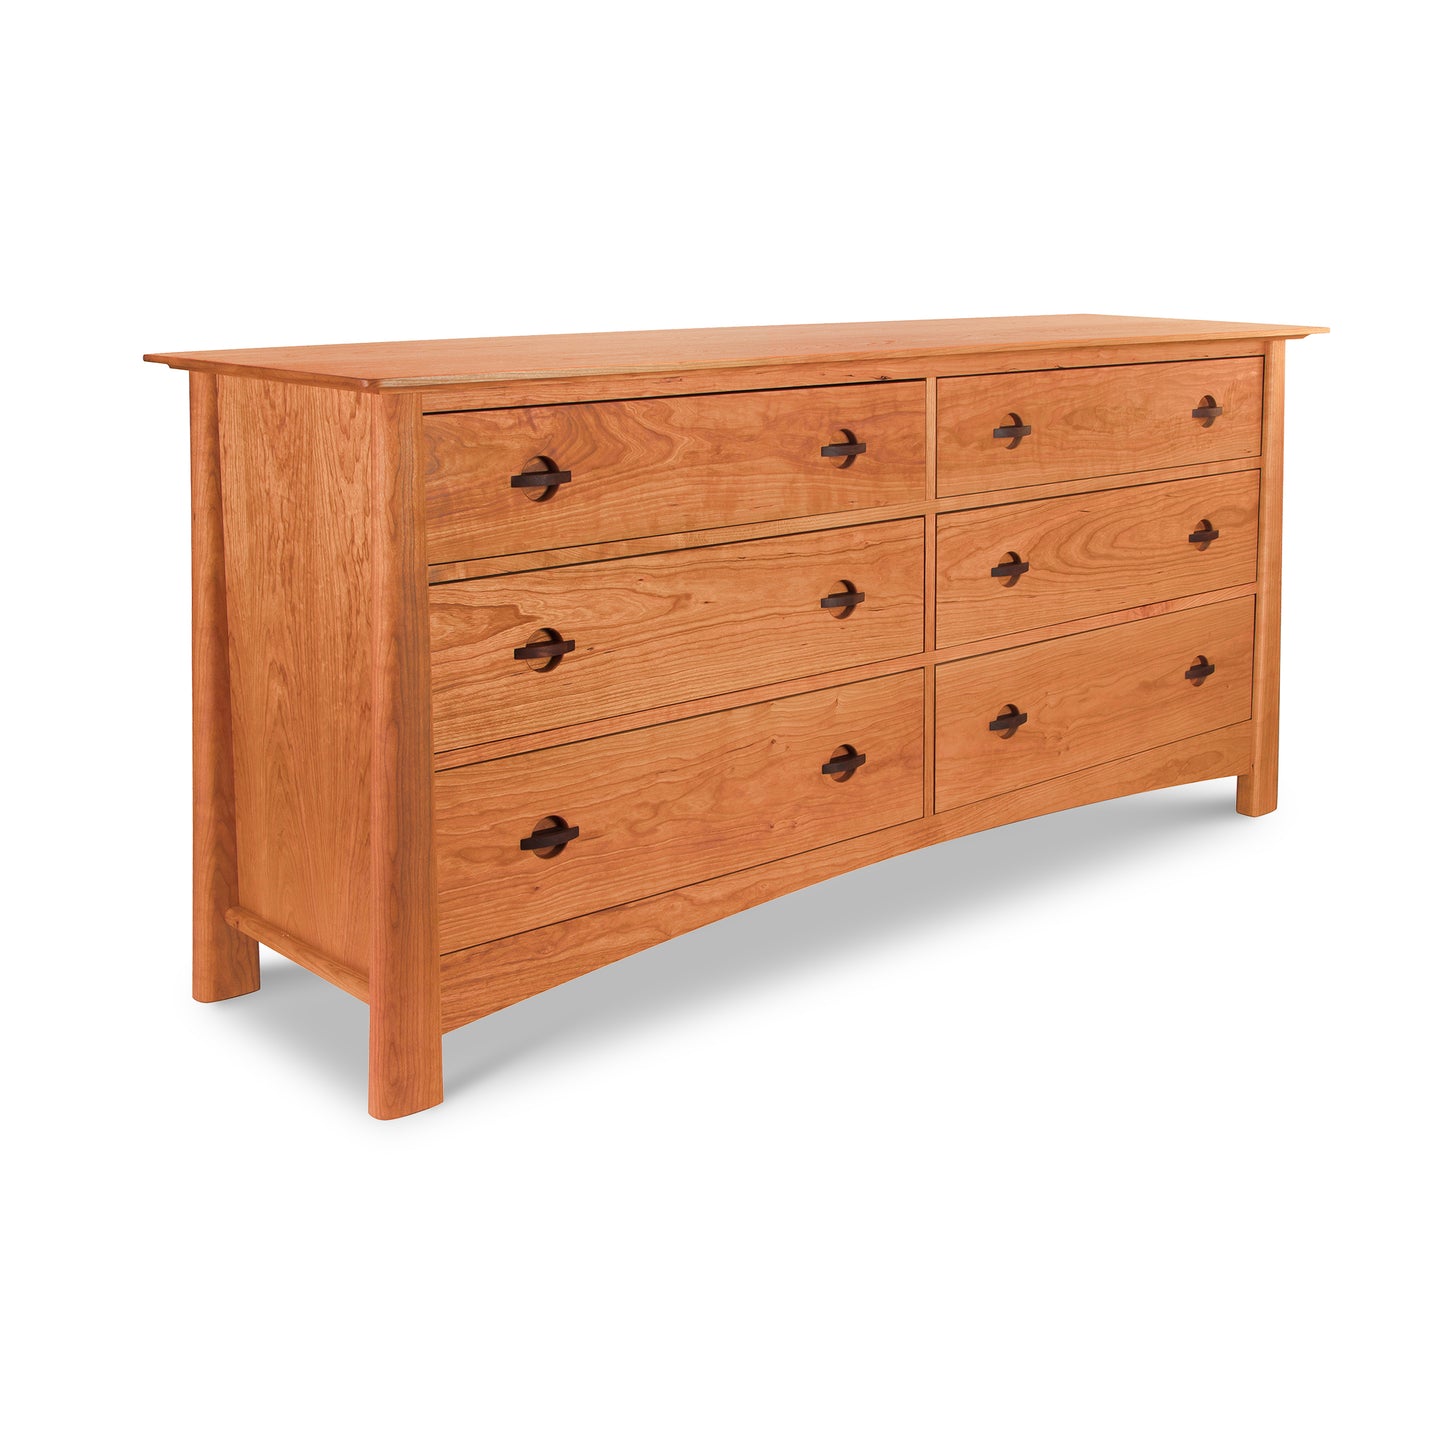 A Maple Corner Woodworks Cherry Moon 6-Drawer Dresser, made from eco-friendly wood.